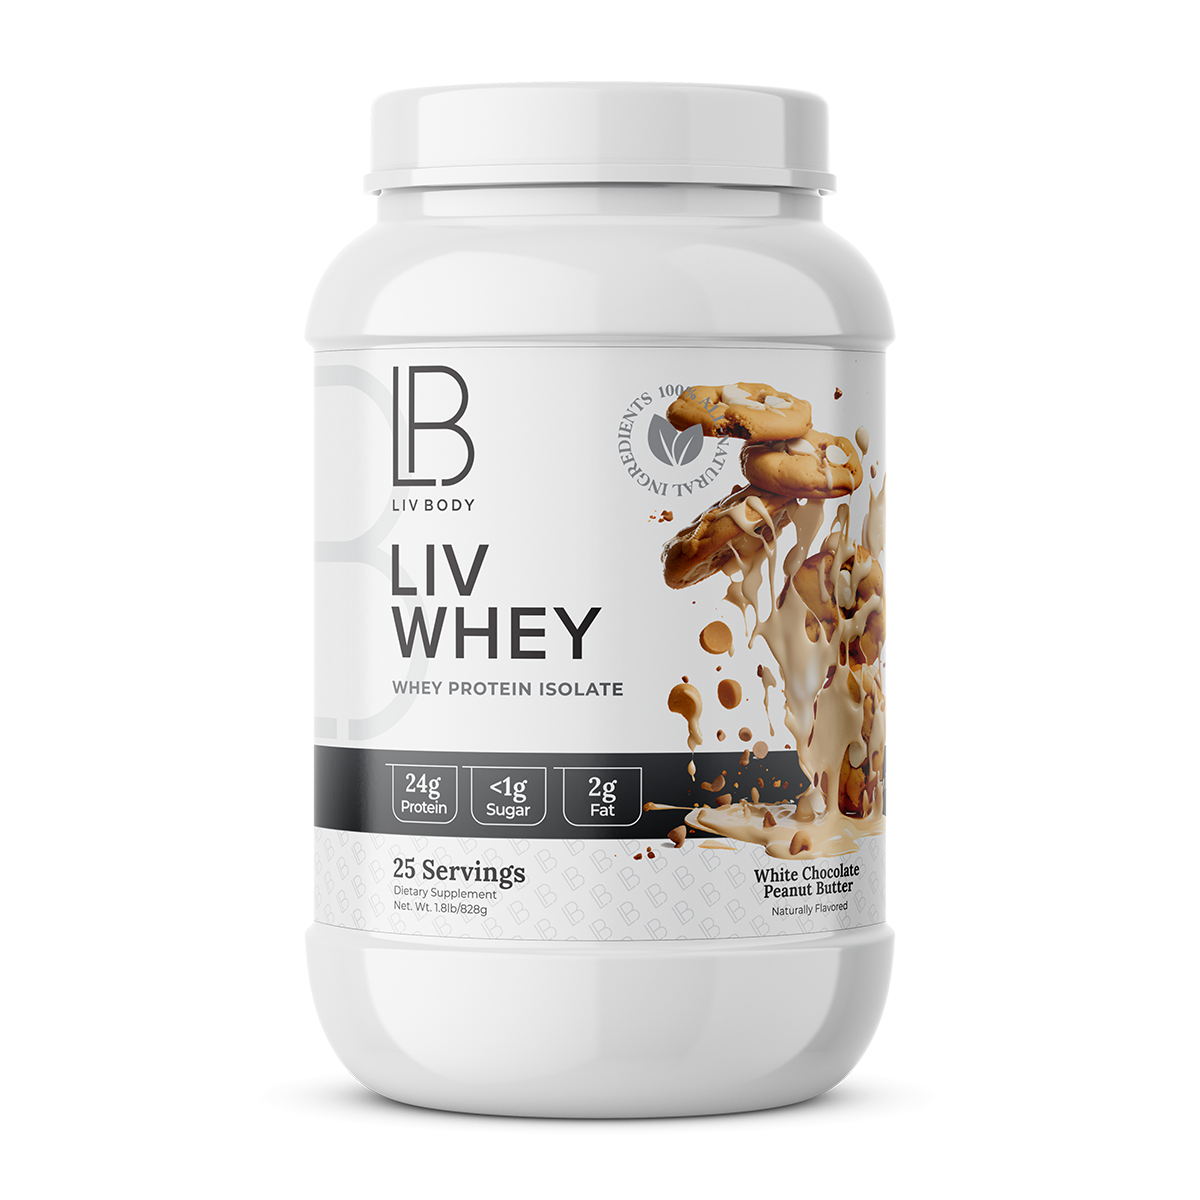 Image of LIV Whey Isolate Protein, one of the best protein powder options.